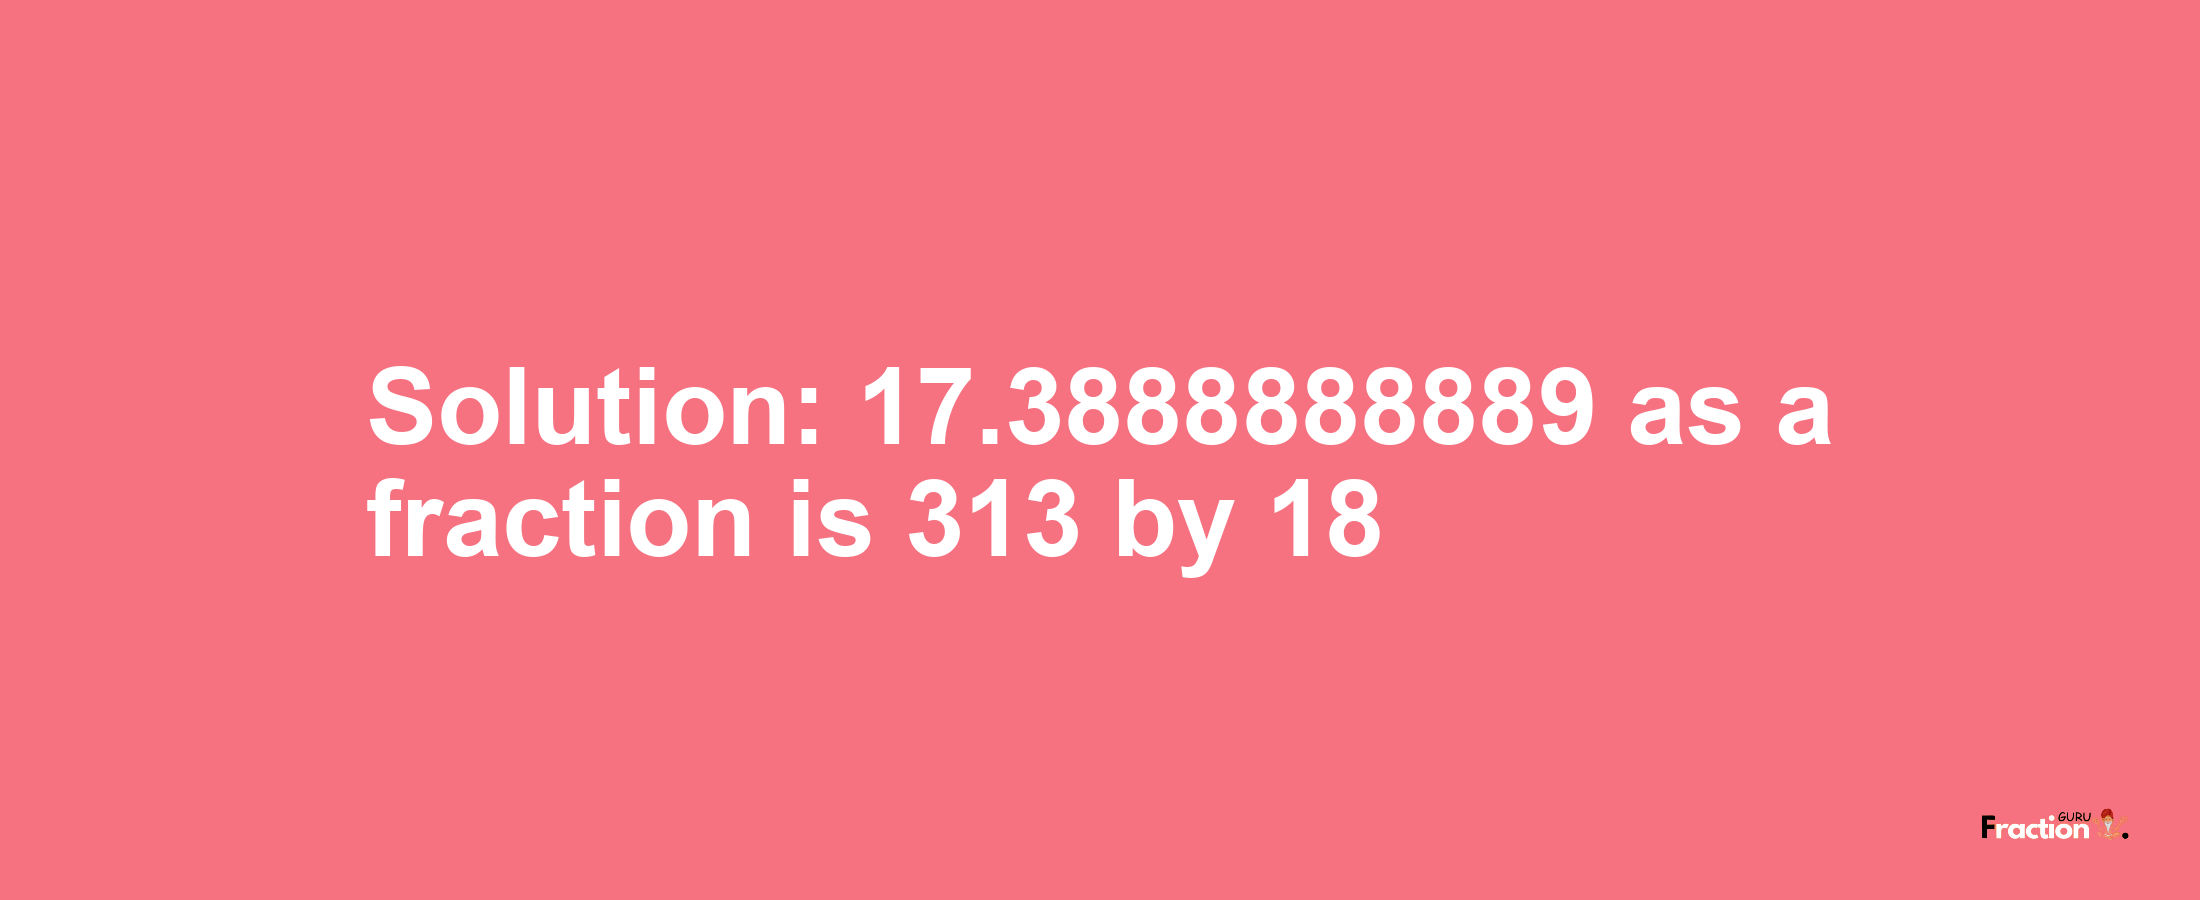 Solution:17.3888888889 as a fraction is 313/18